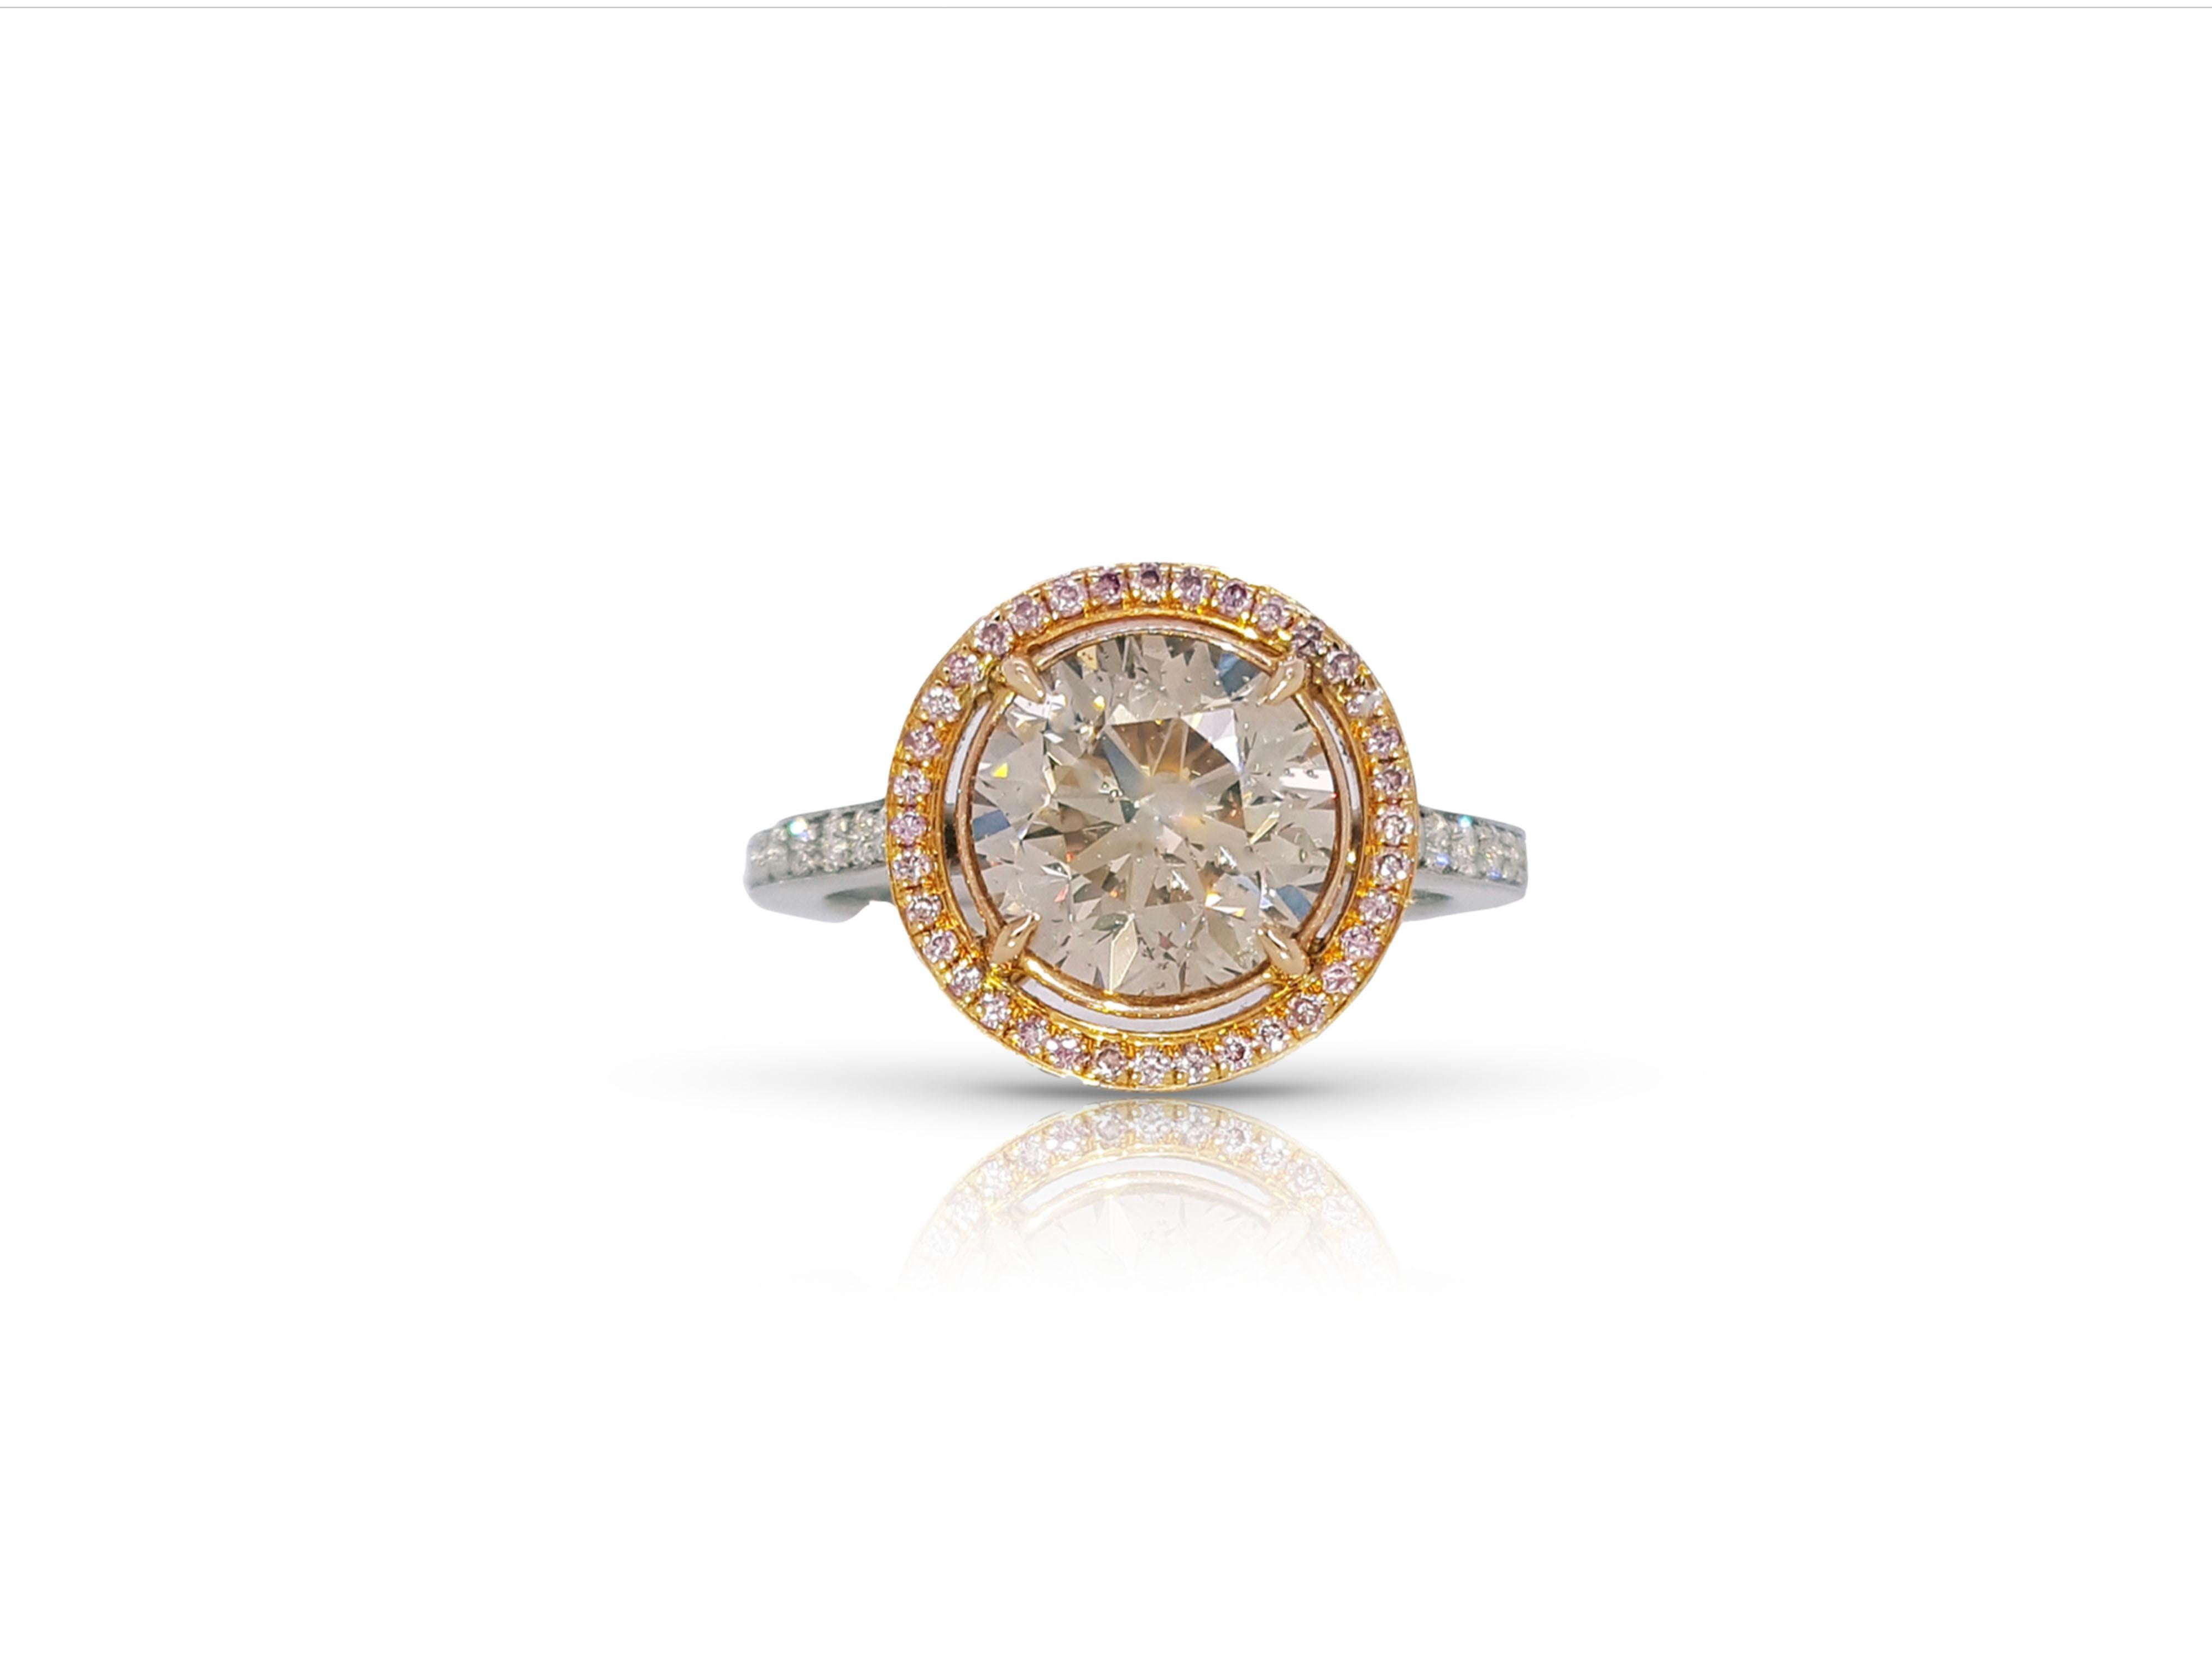 Engagement ring style showcasing a 2.91 carat Brown, round brilliant cut diamond at the center
The classic design brings out the beauty of the center stone with the surrounding 78 round pink diamonds and 40 white diamonds weighing approximately 0.79